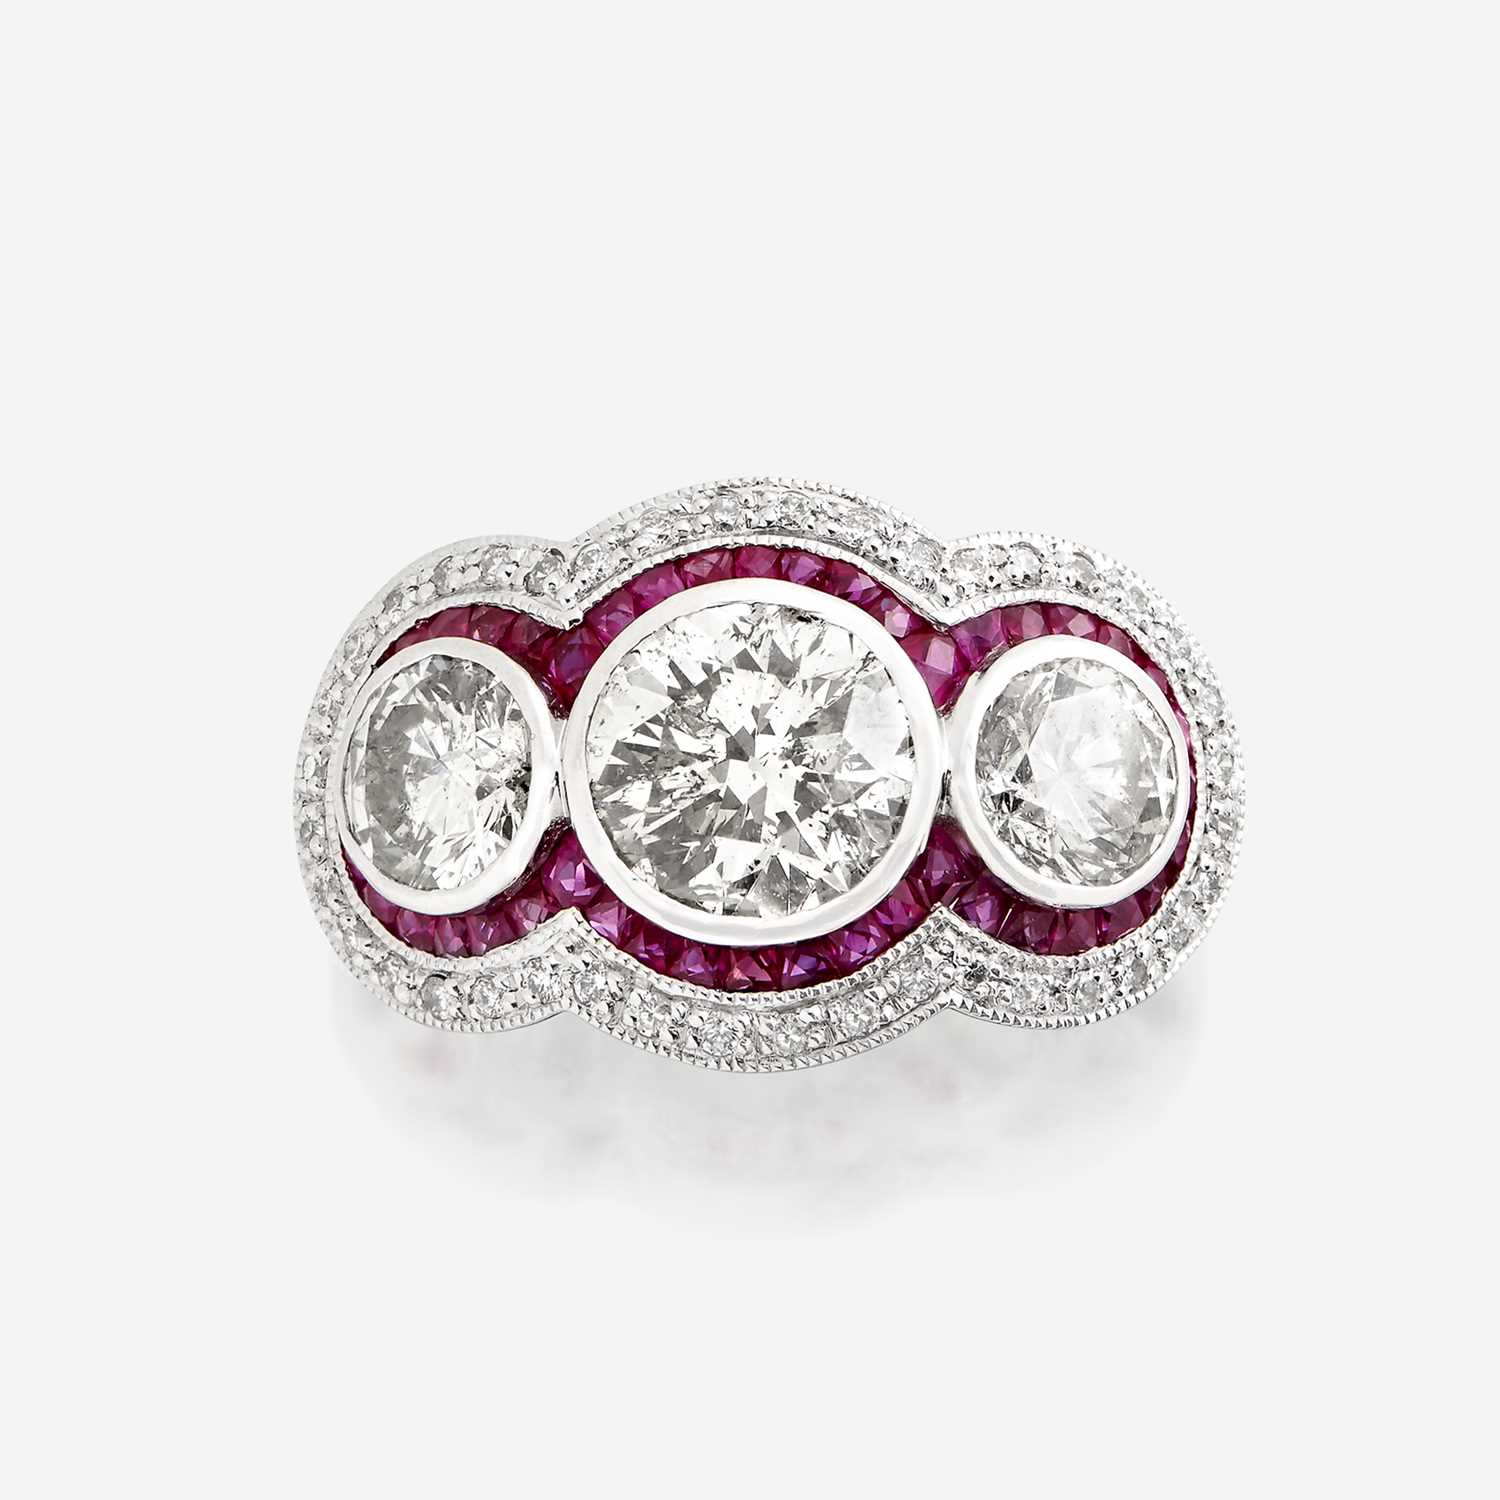 Lot 99 - A diamond, ruby, and platinum ring